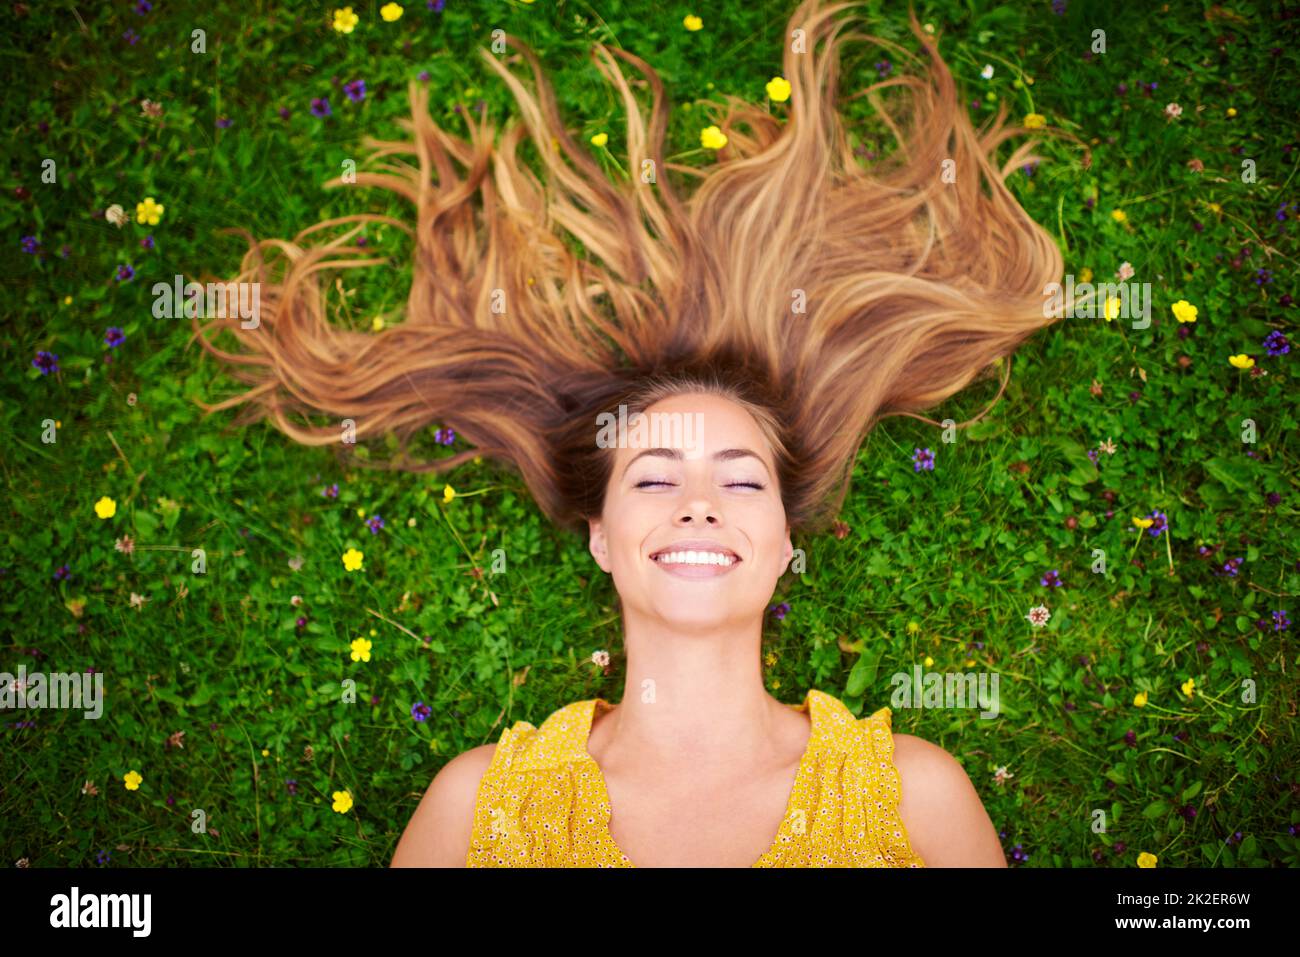 When youre happy everyday is a good hair day. High angle shot of a carefree young woman relaxing in a field of grass and flowers. Stock Photo